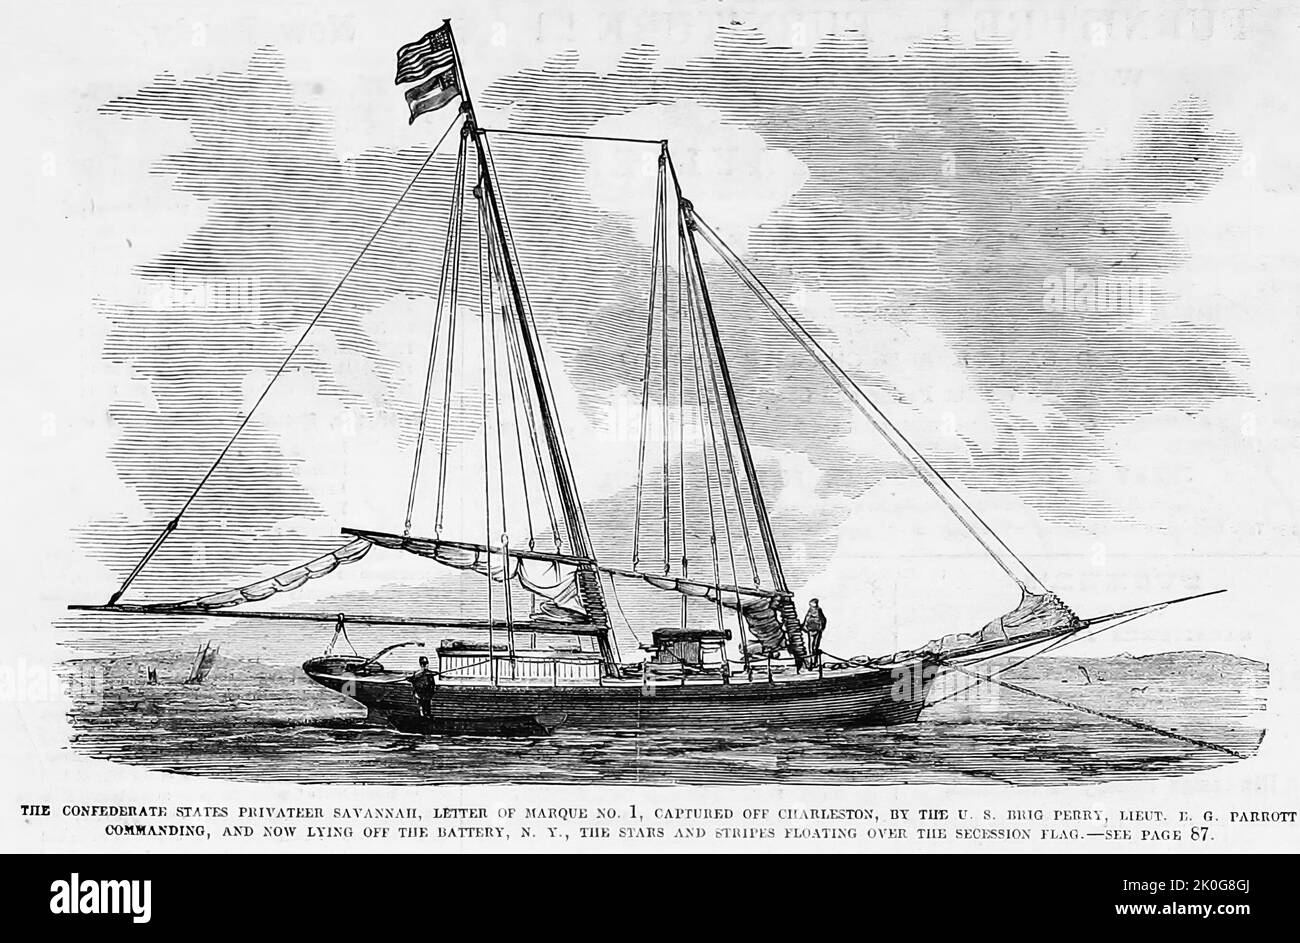 The Confederate States privateer Savannah, Letter of Marque No. 1, captured off Charleston, by the U.S. brig Perry, Lieutenant Parrott commanding, and now lying off the battery, New York, the Stars and Stripes floating over the Secession flag, June 1861. 19th century American Civil War illustration from Frank Leslie's Illustrated Newspaper Stock Photo